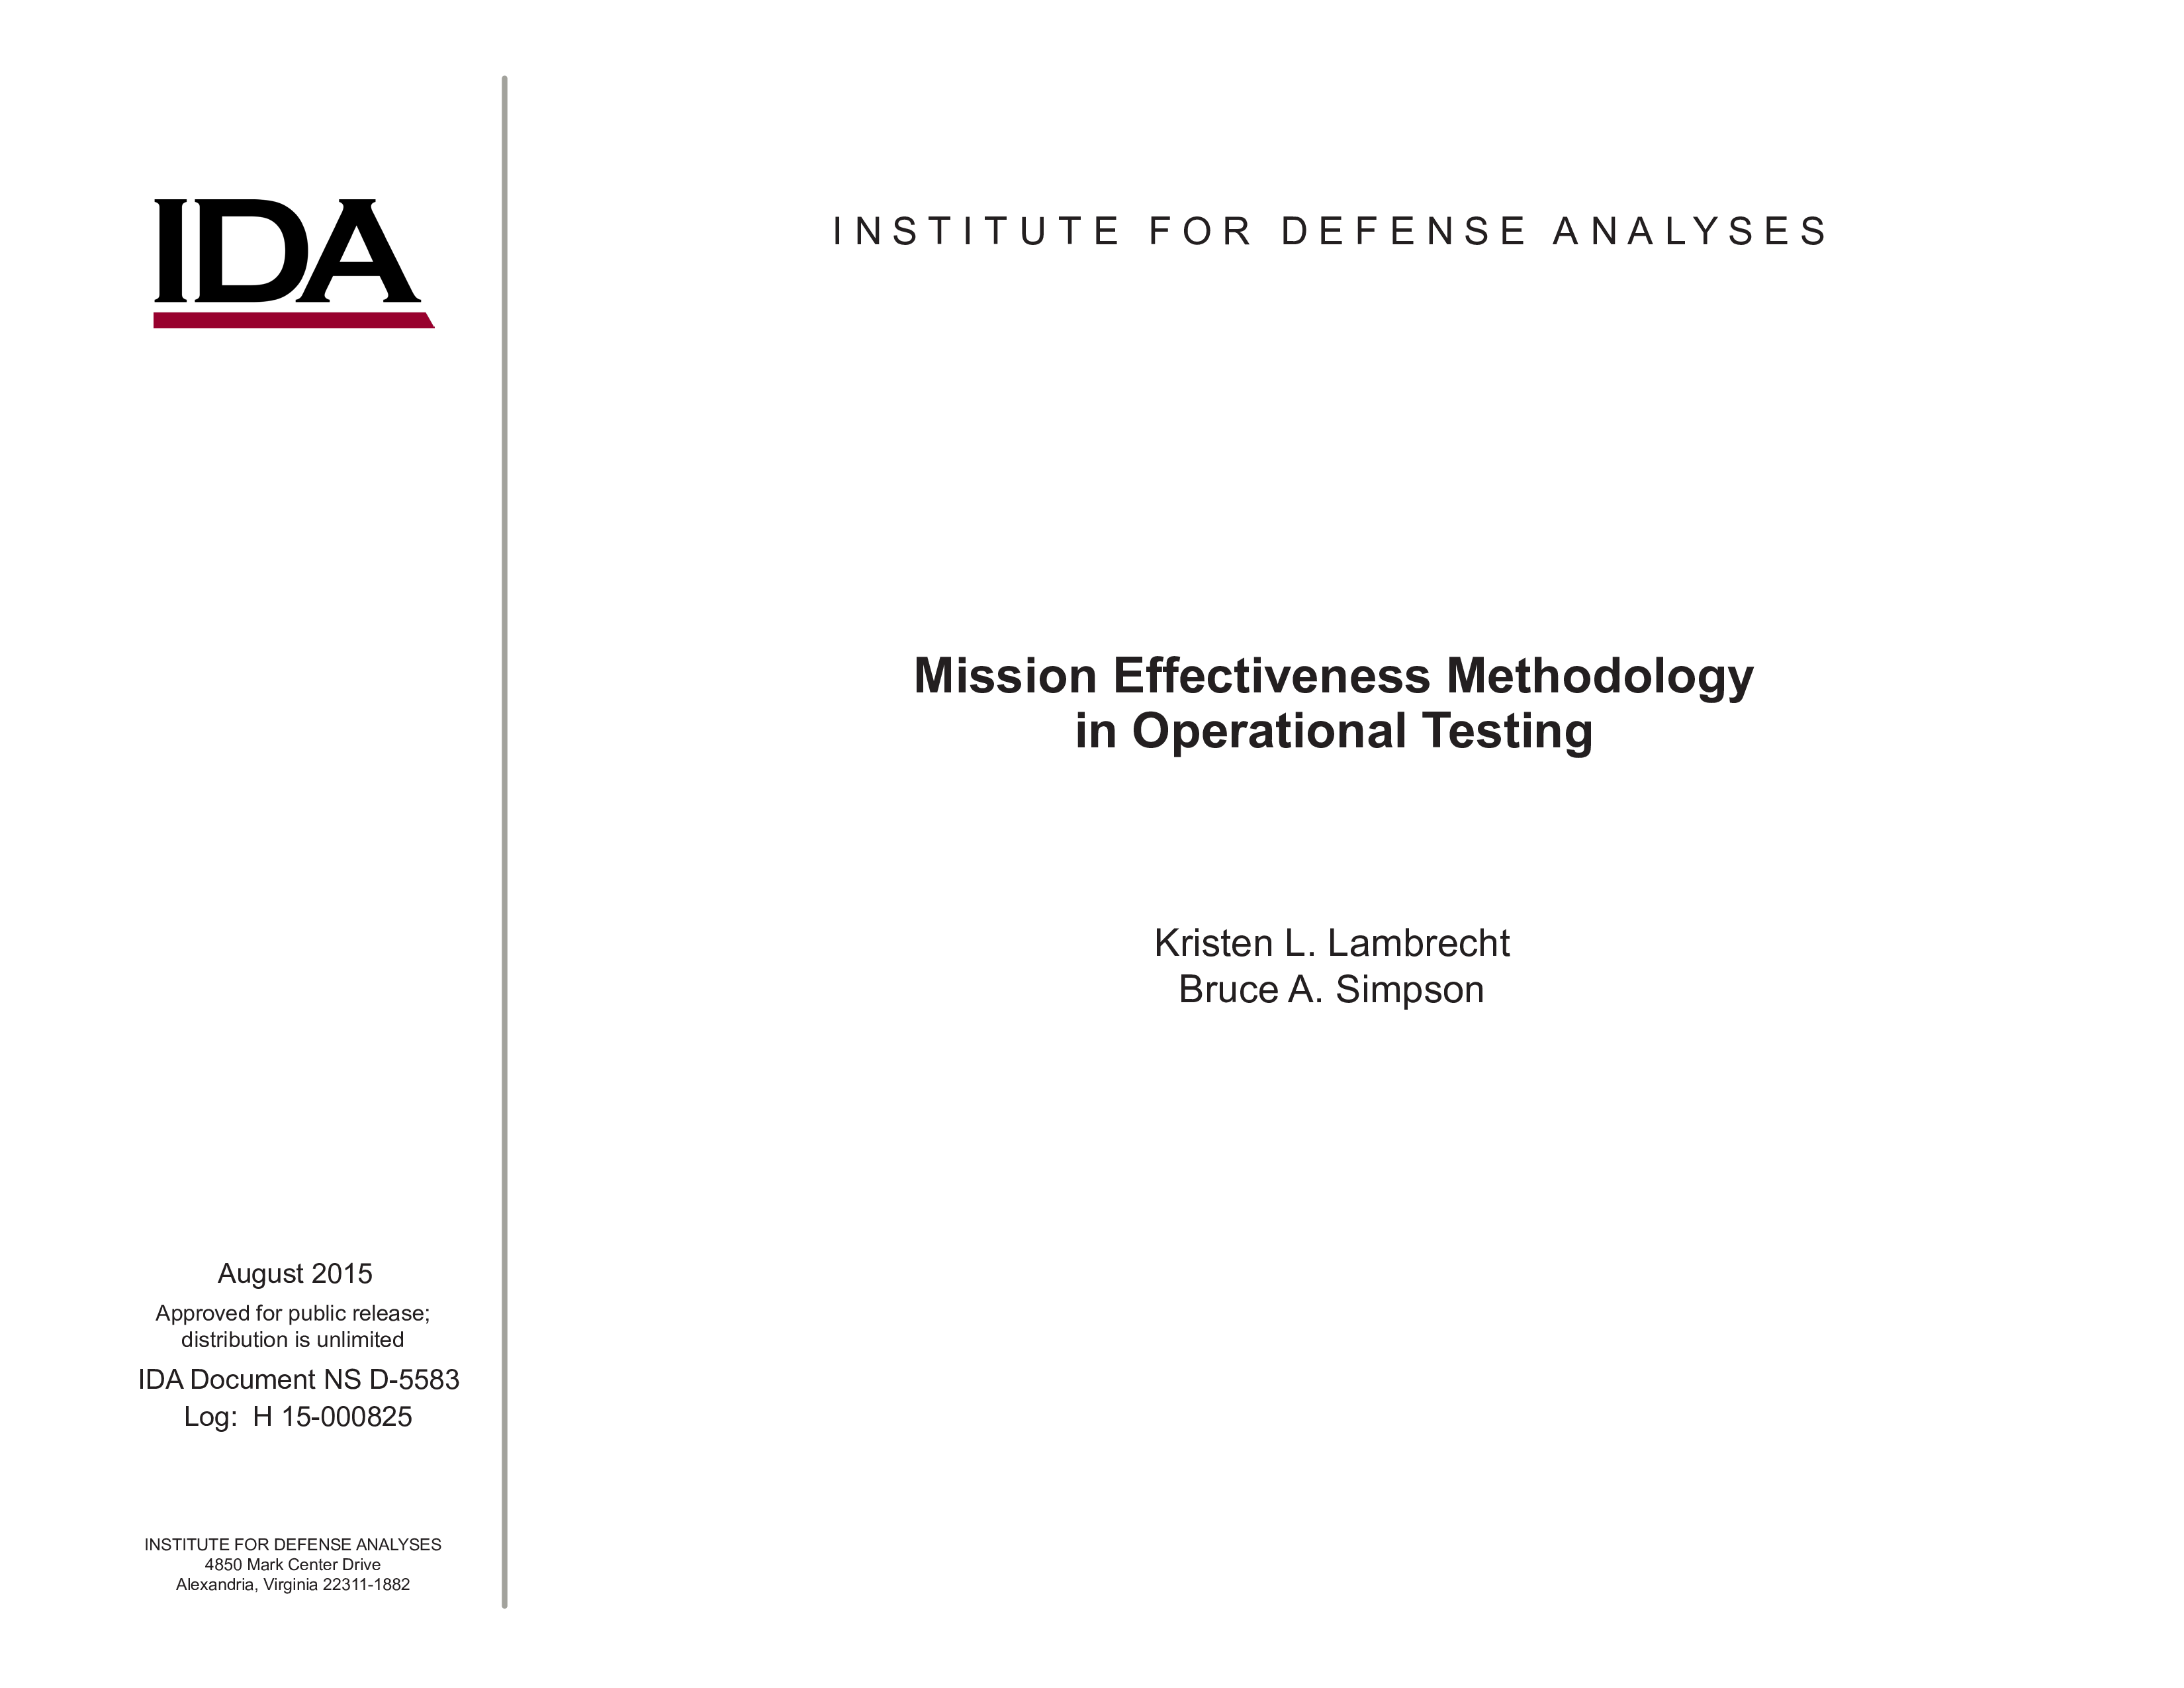 Mission Effectiveness Methodology in Operational Testing 